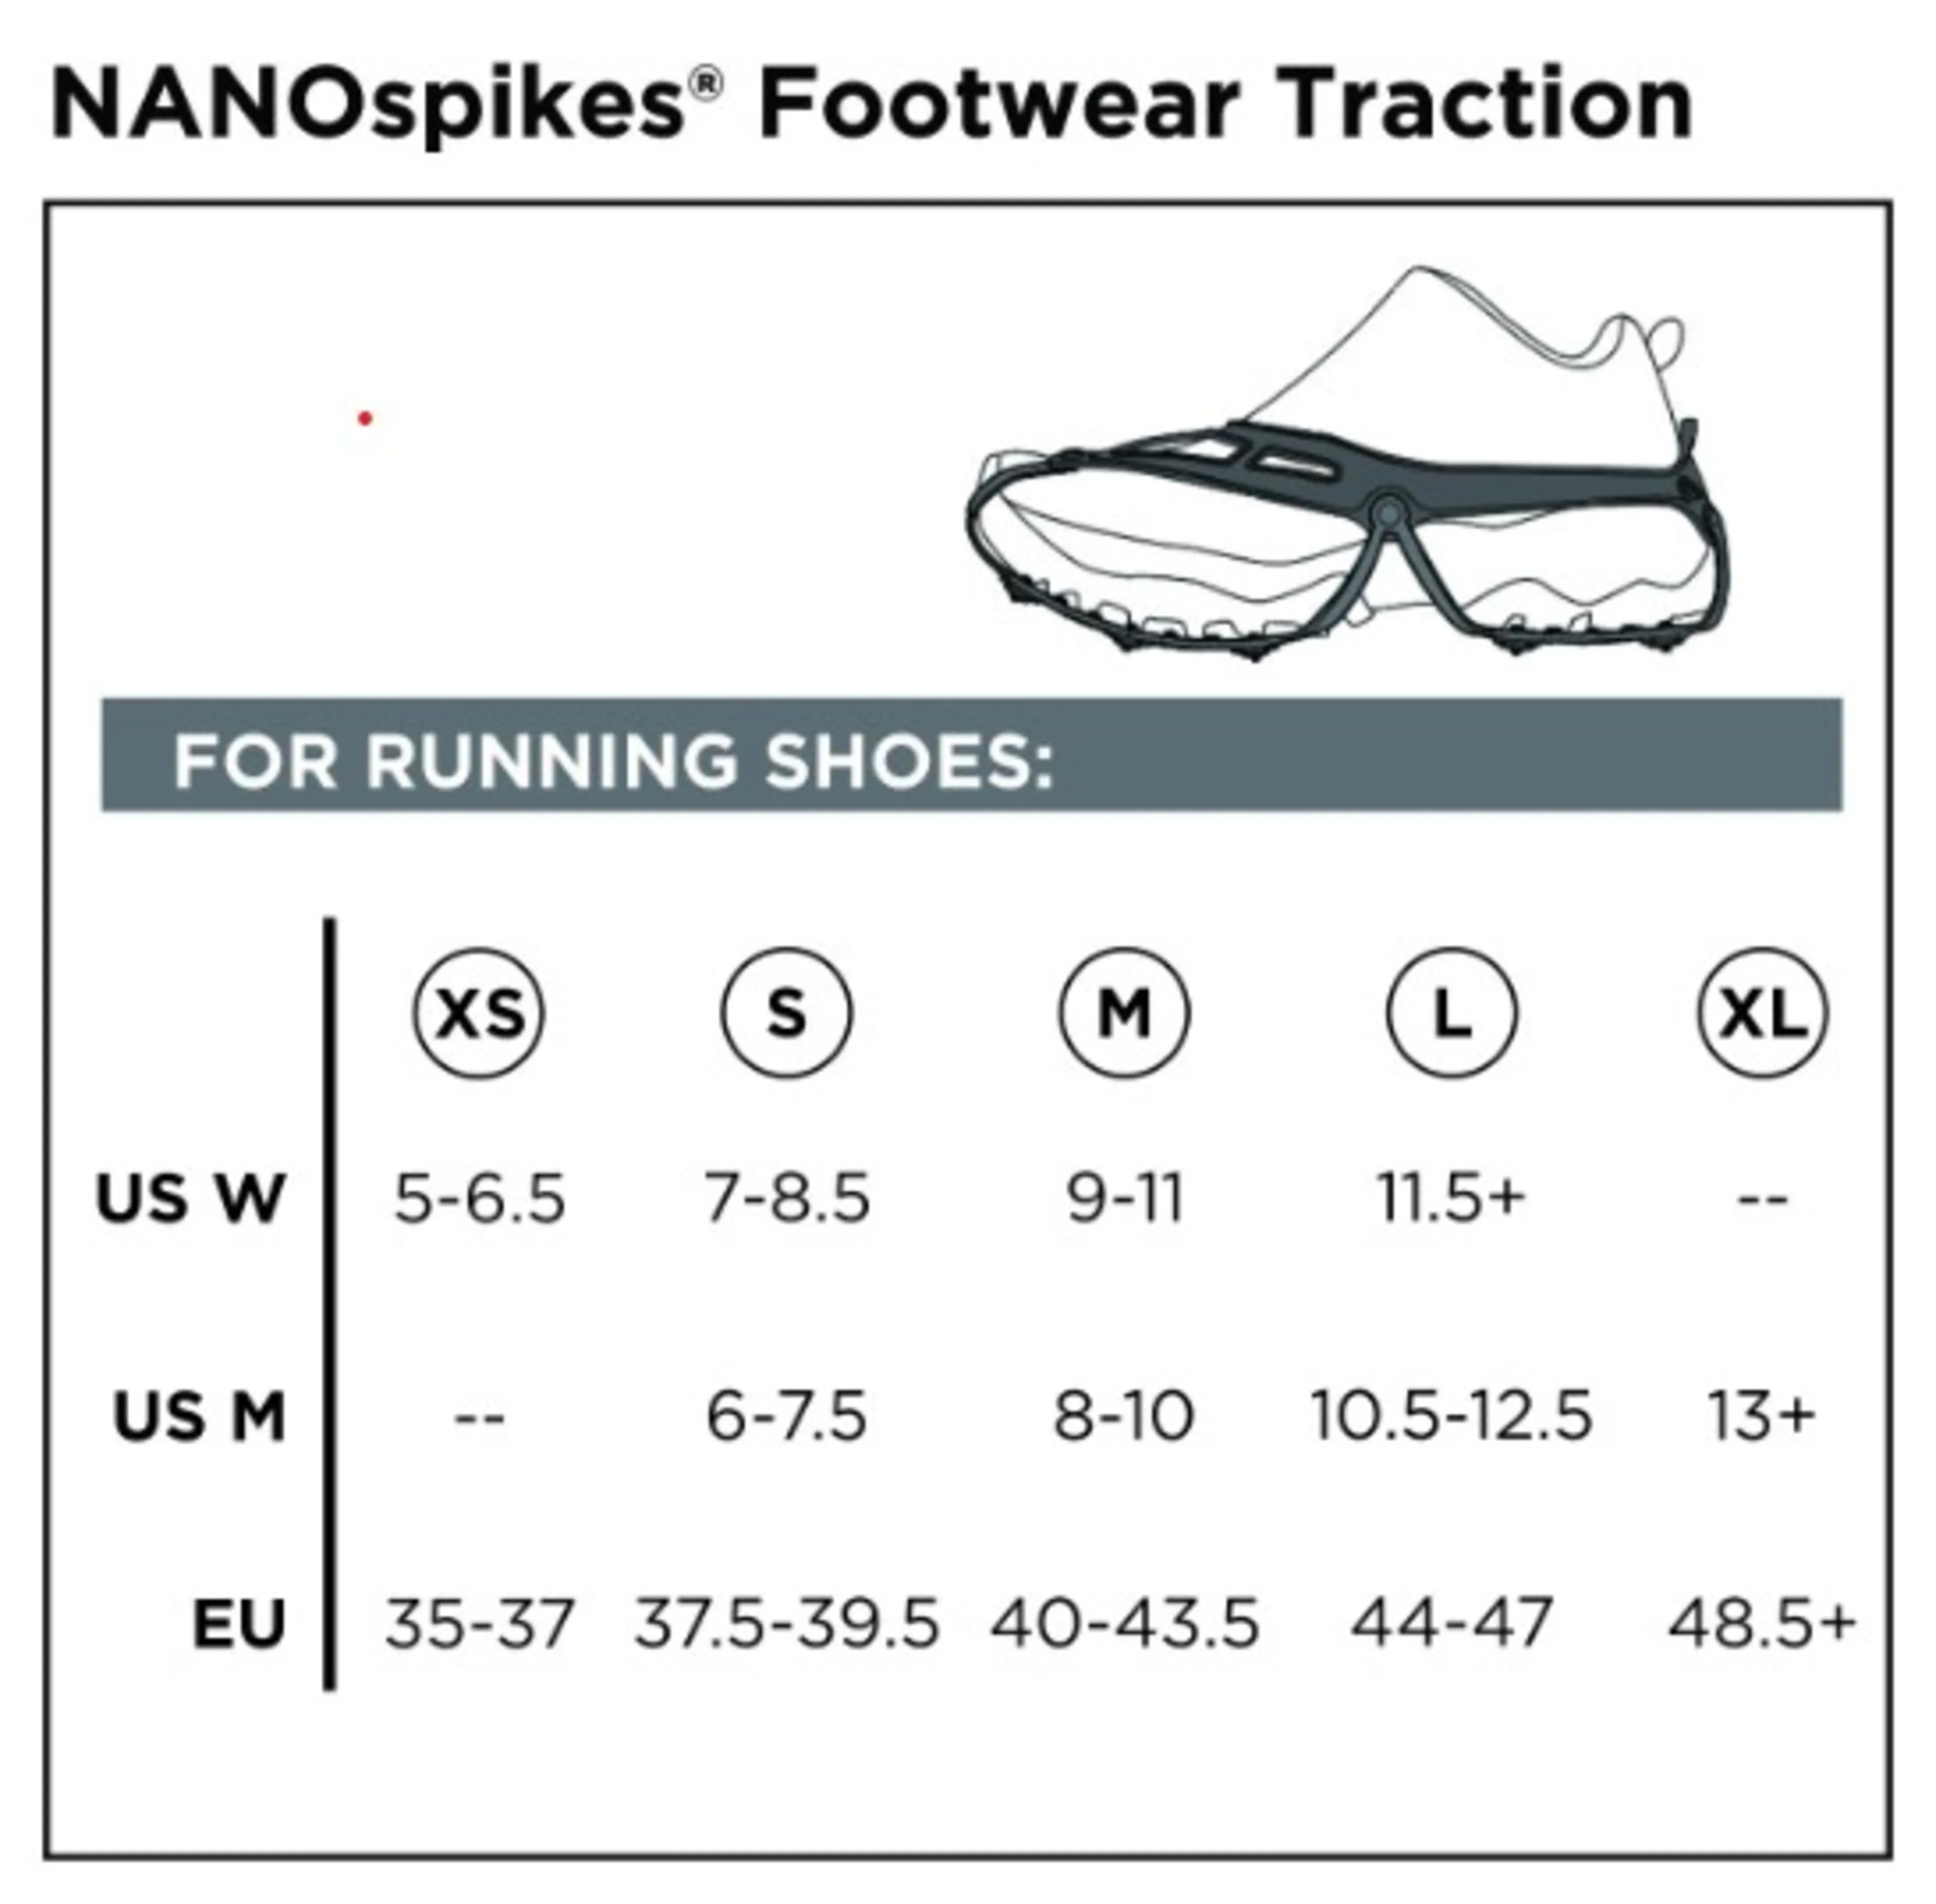 NANOspikes Footwear Traction v2, XS